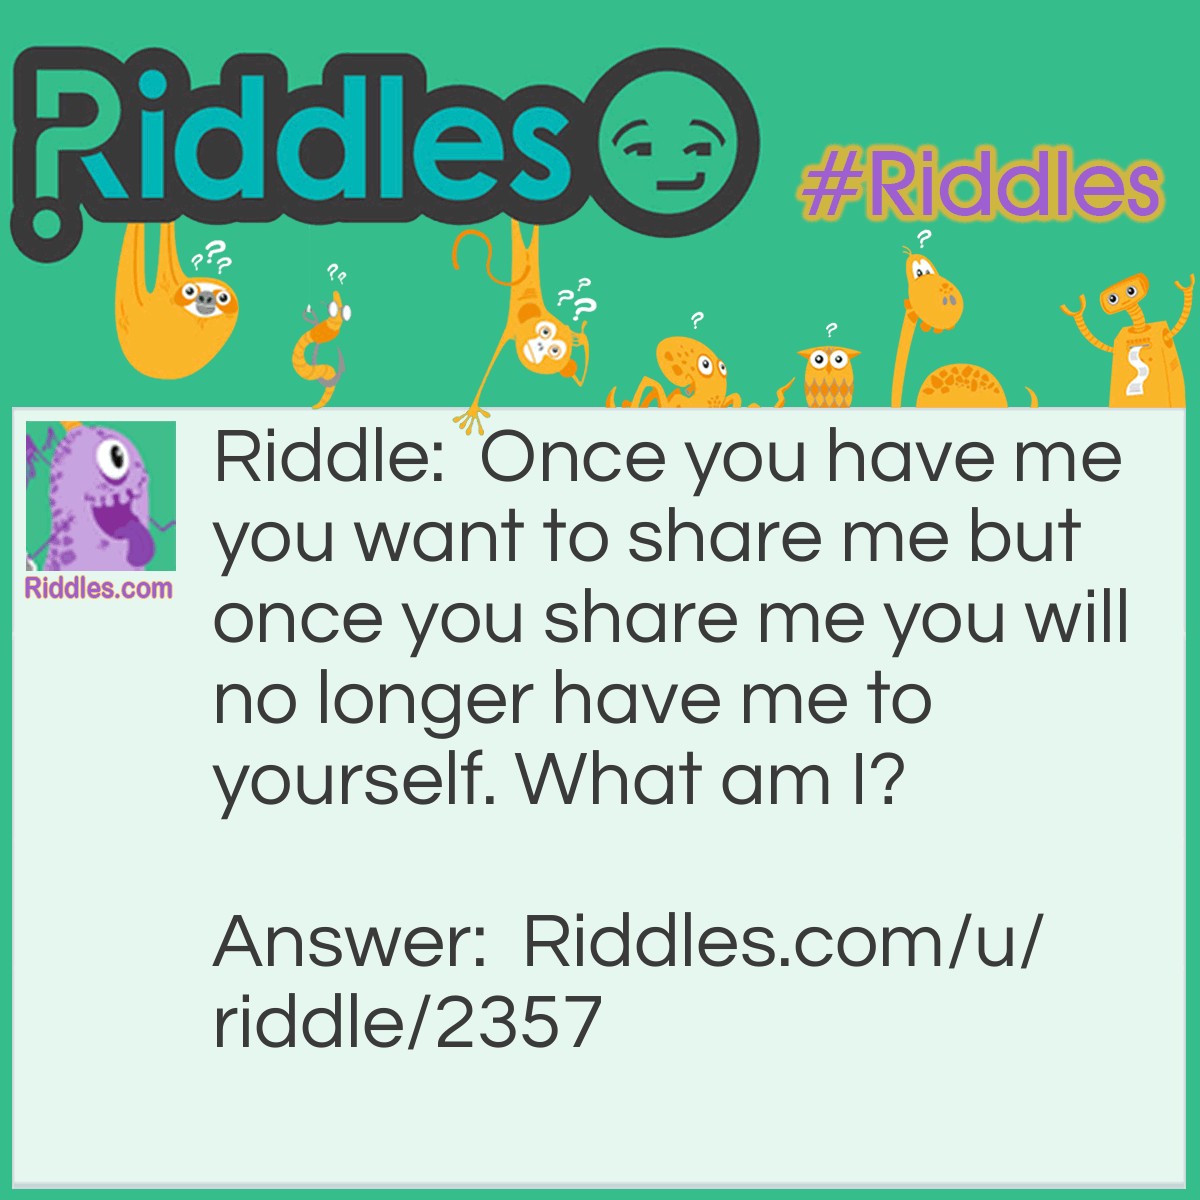 Riddle: Once you have me you want to share me but once you share me you will no longer have me to yourself. What am I? Answer: I am a secret.